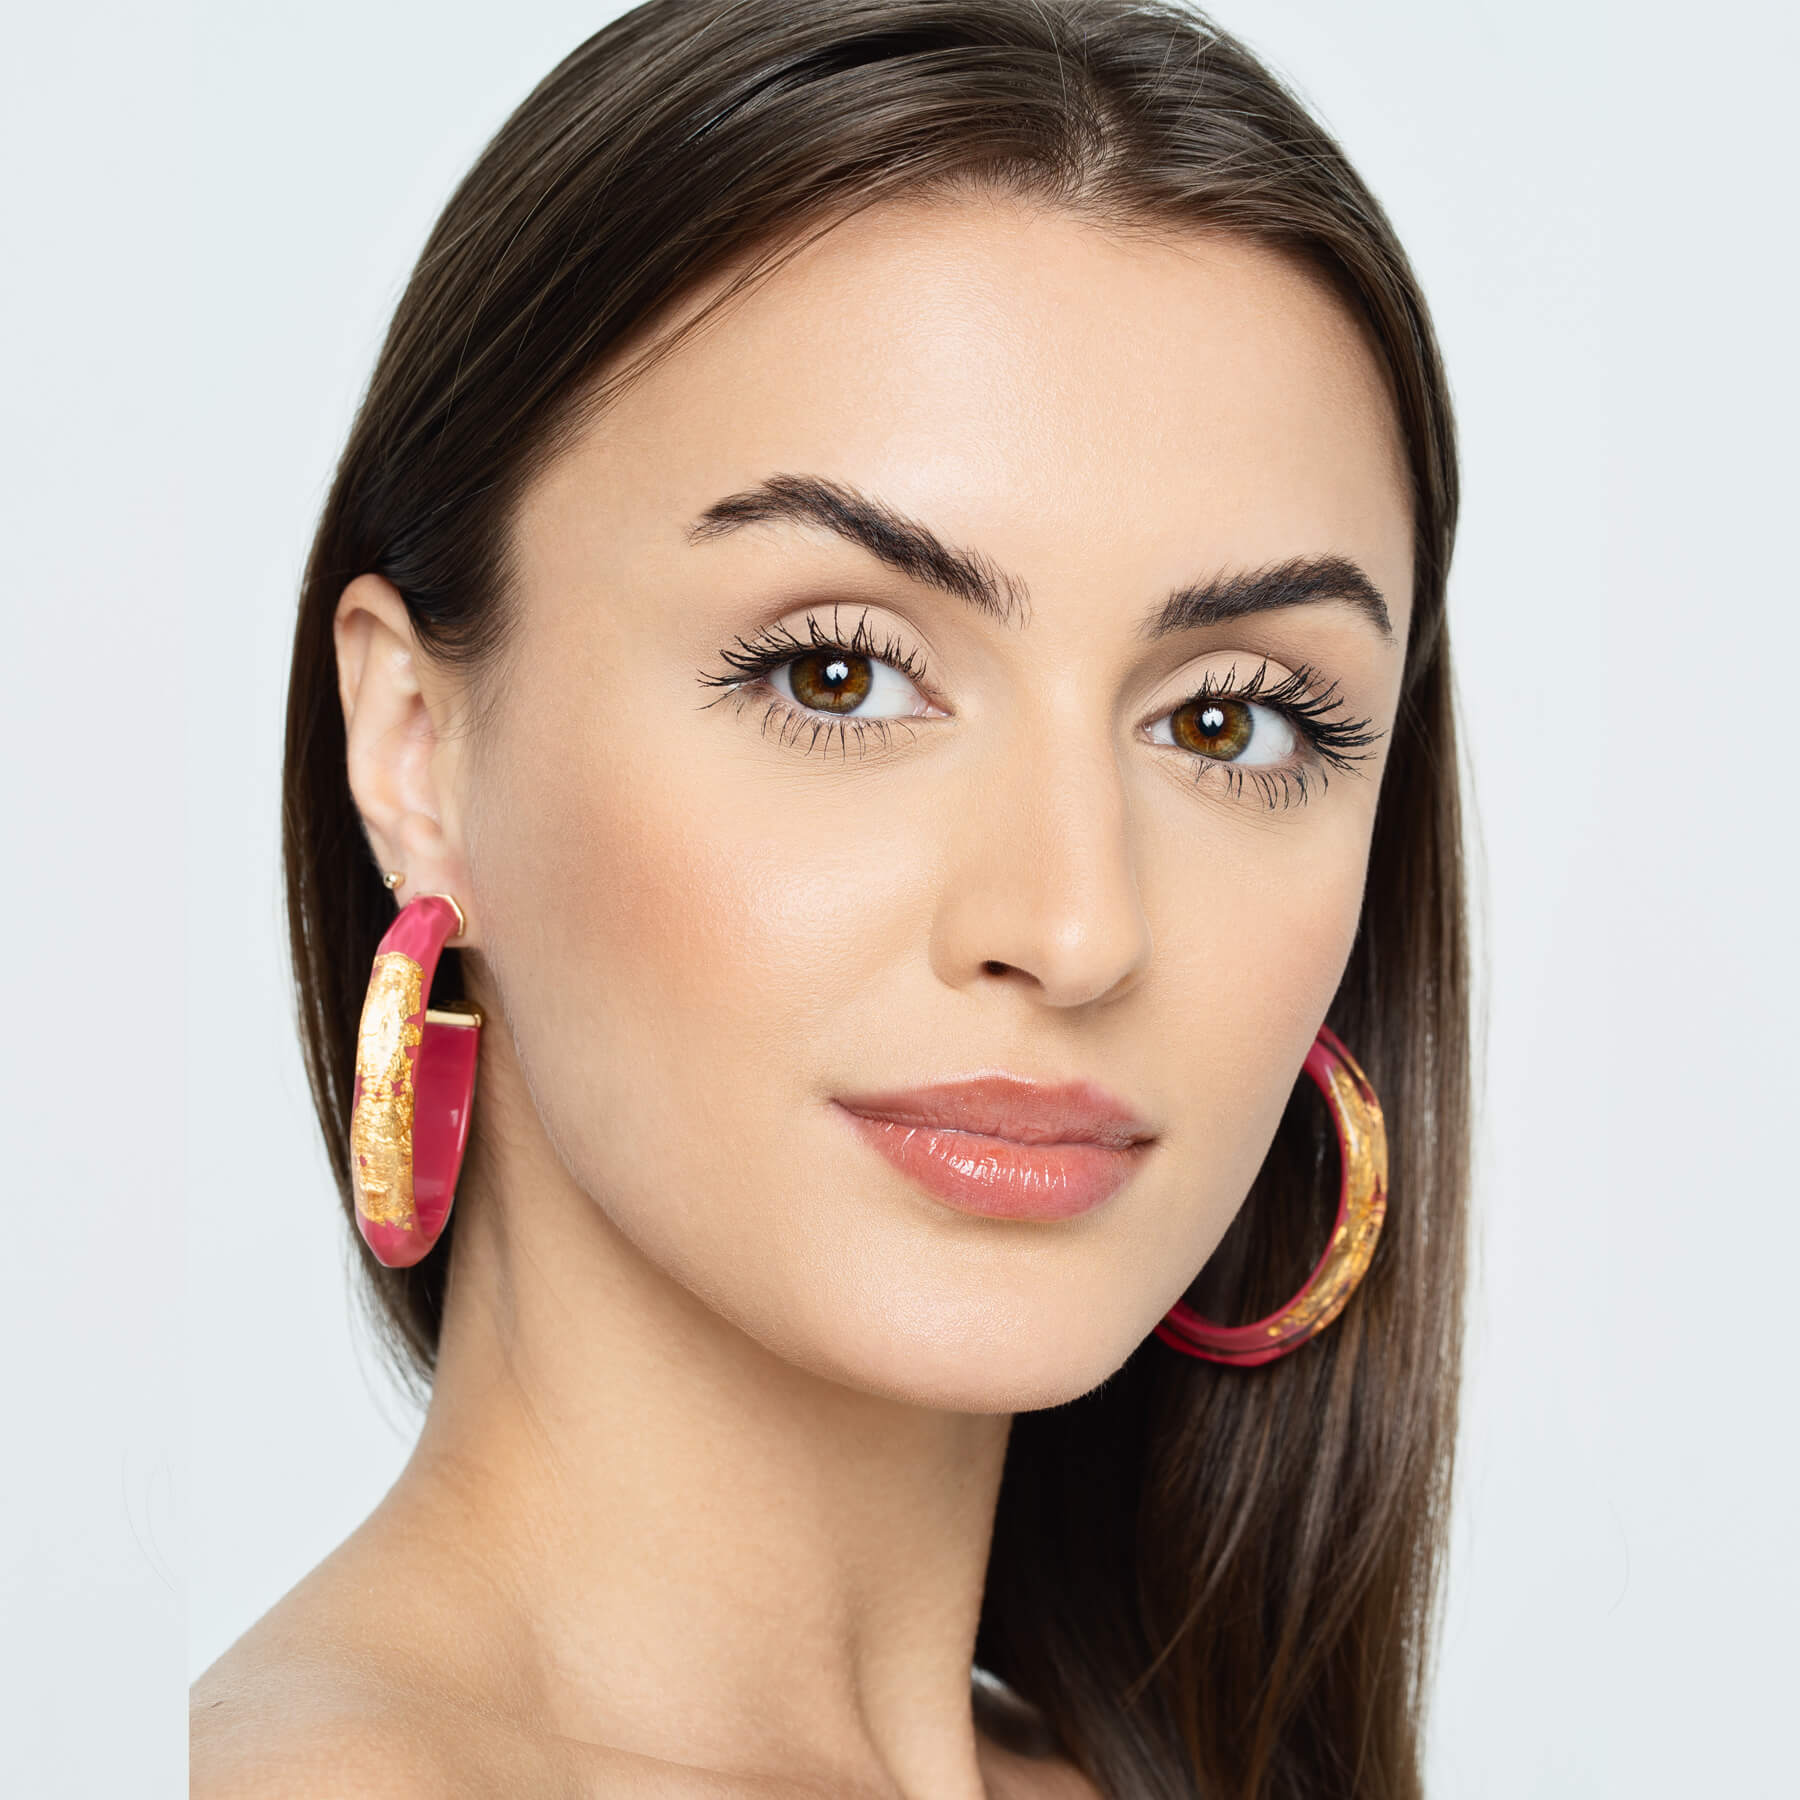 Large Faceted Gold Leaf Lucite Hoops in Neon